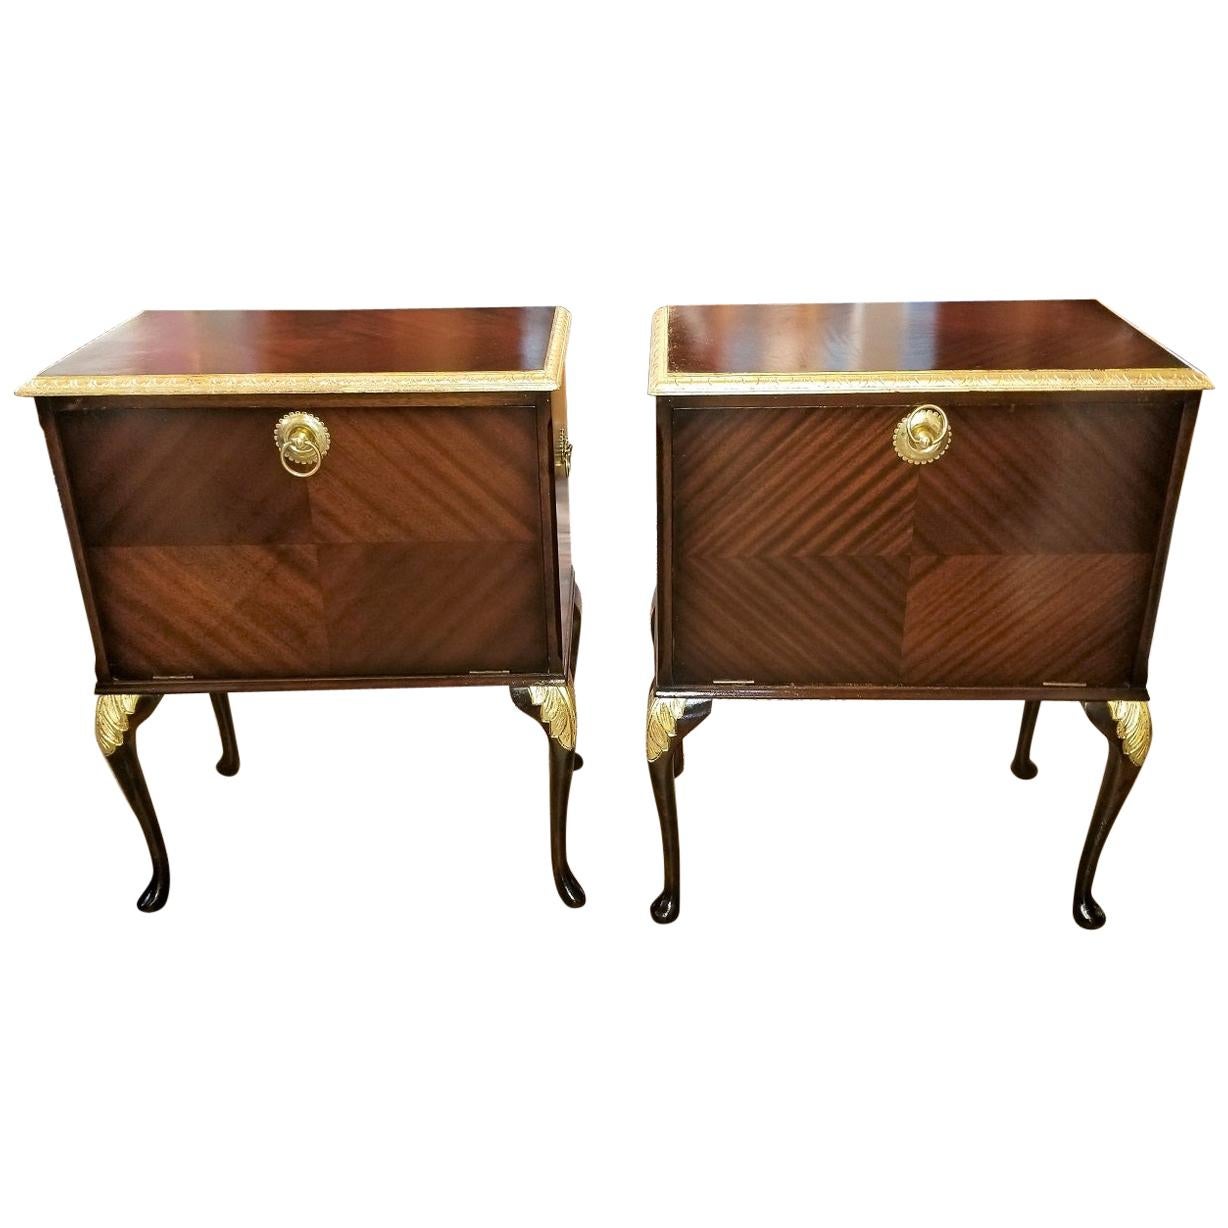 Pair of Matching Side Tables or Nightstands with Gilt Accents